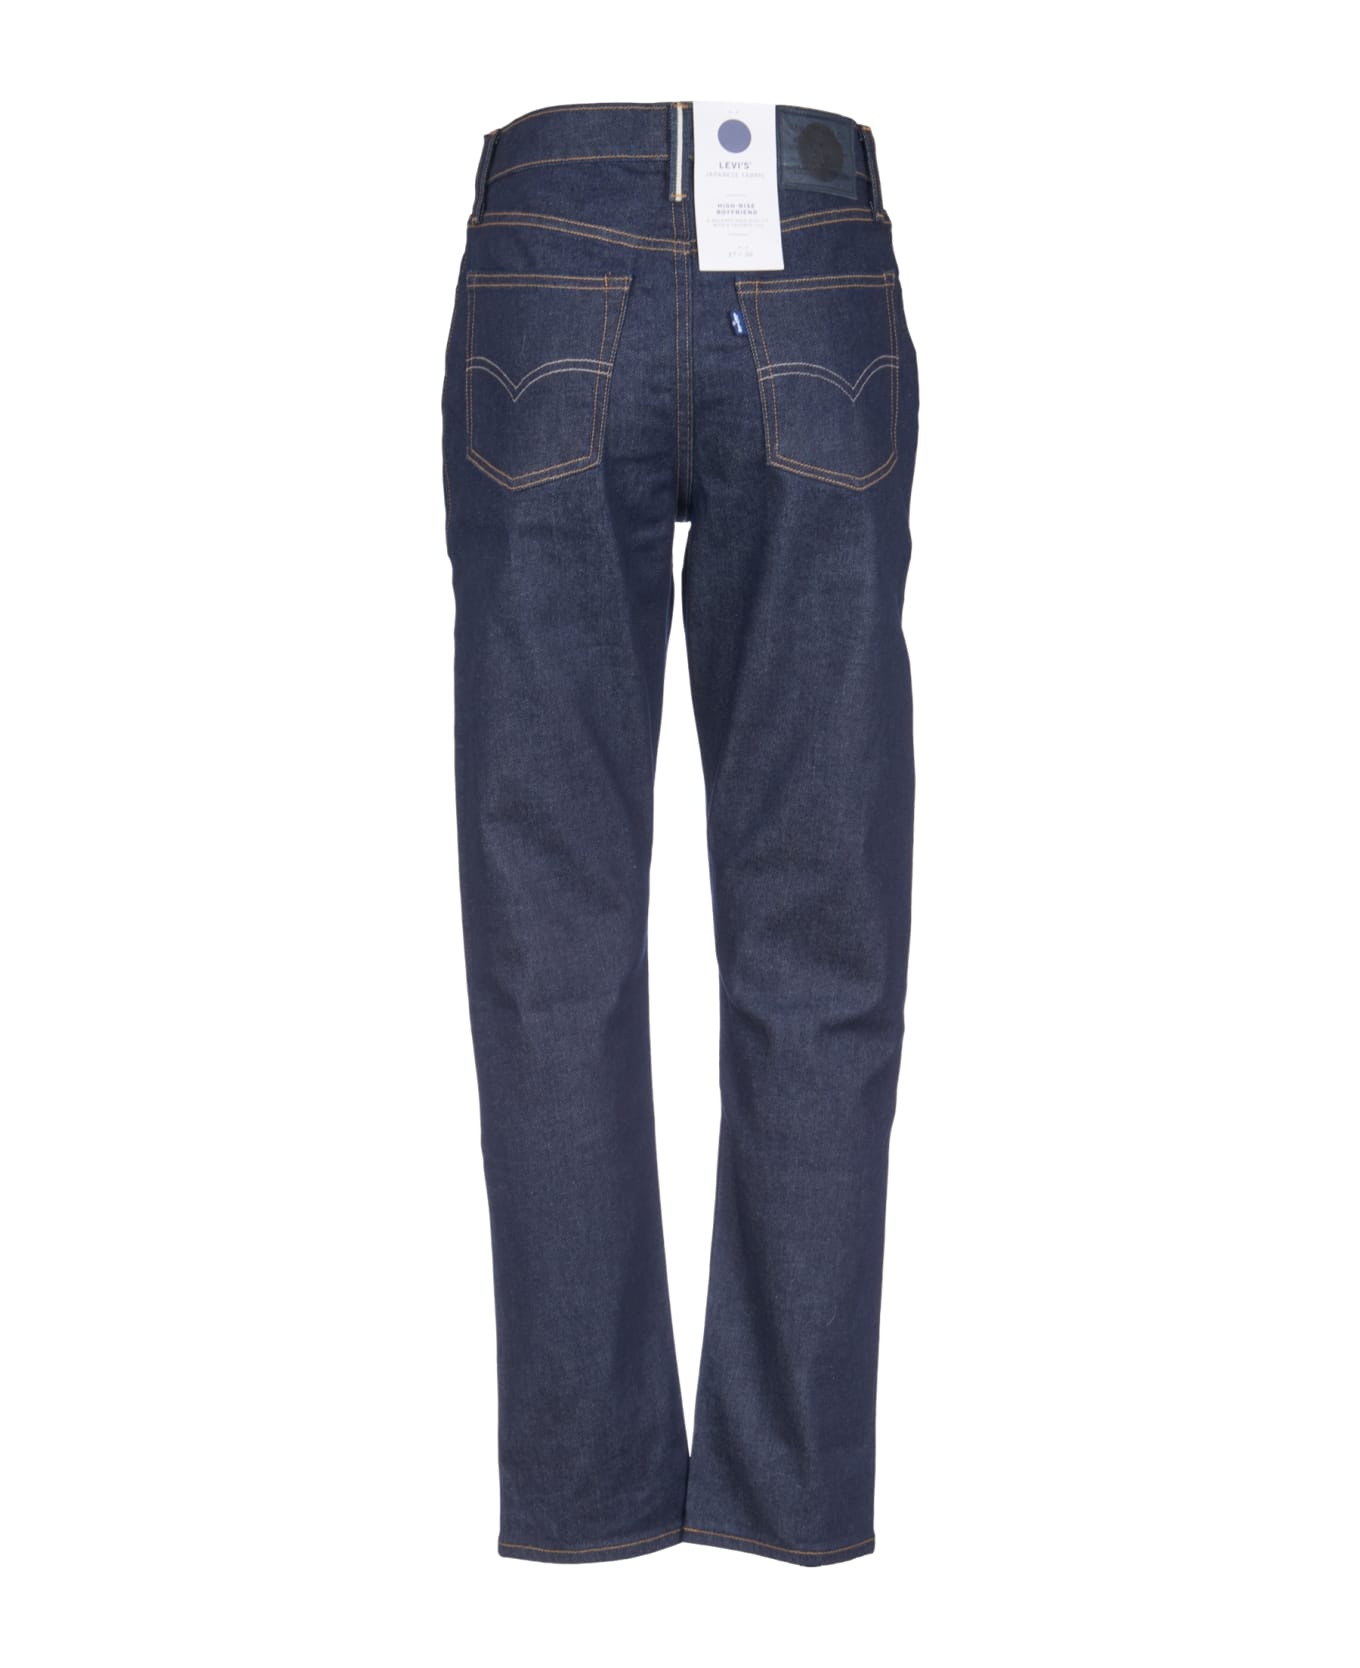 Levi's Button Fitted Jeans - Blue デニム